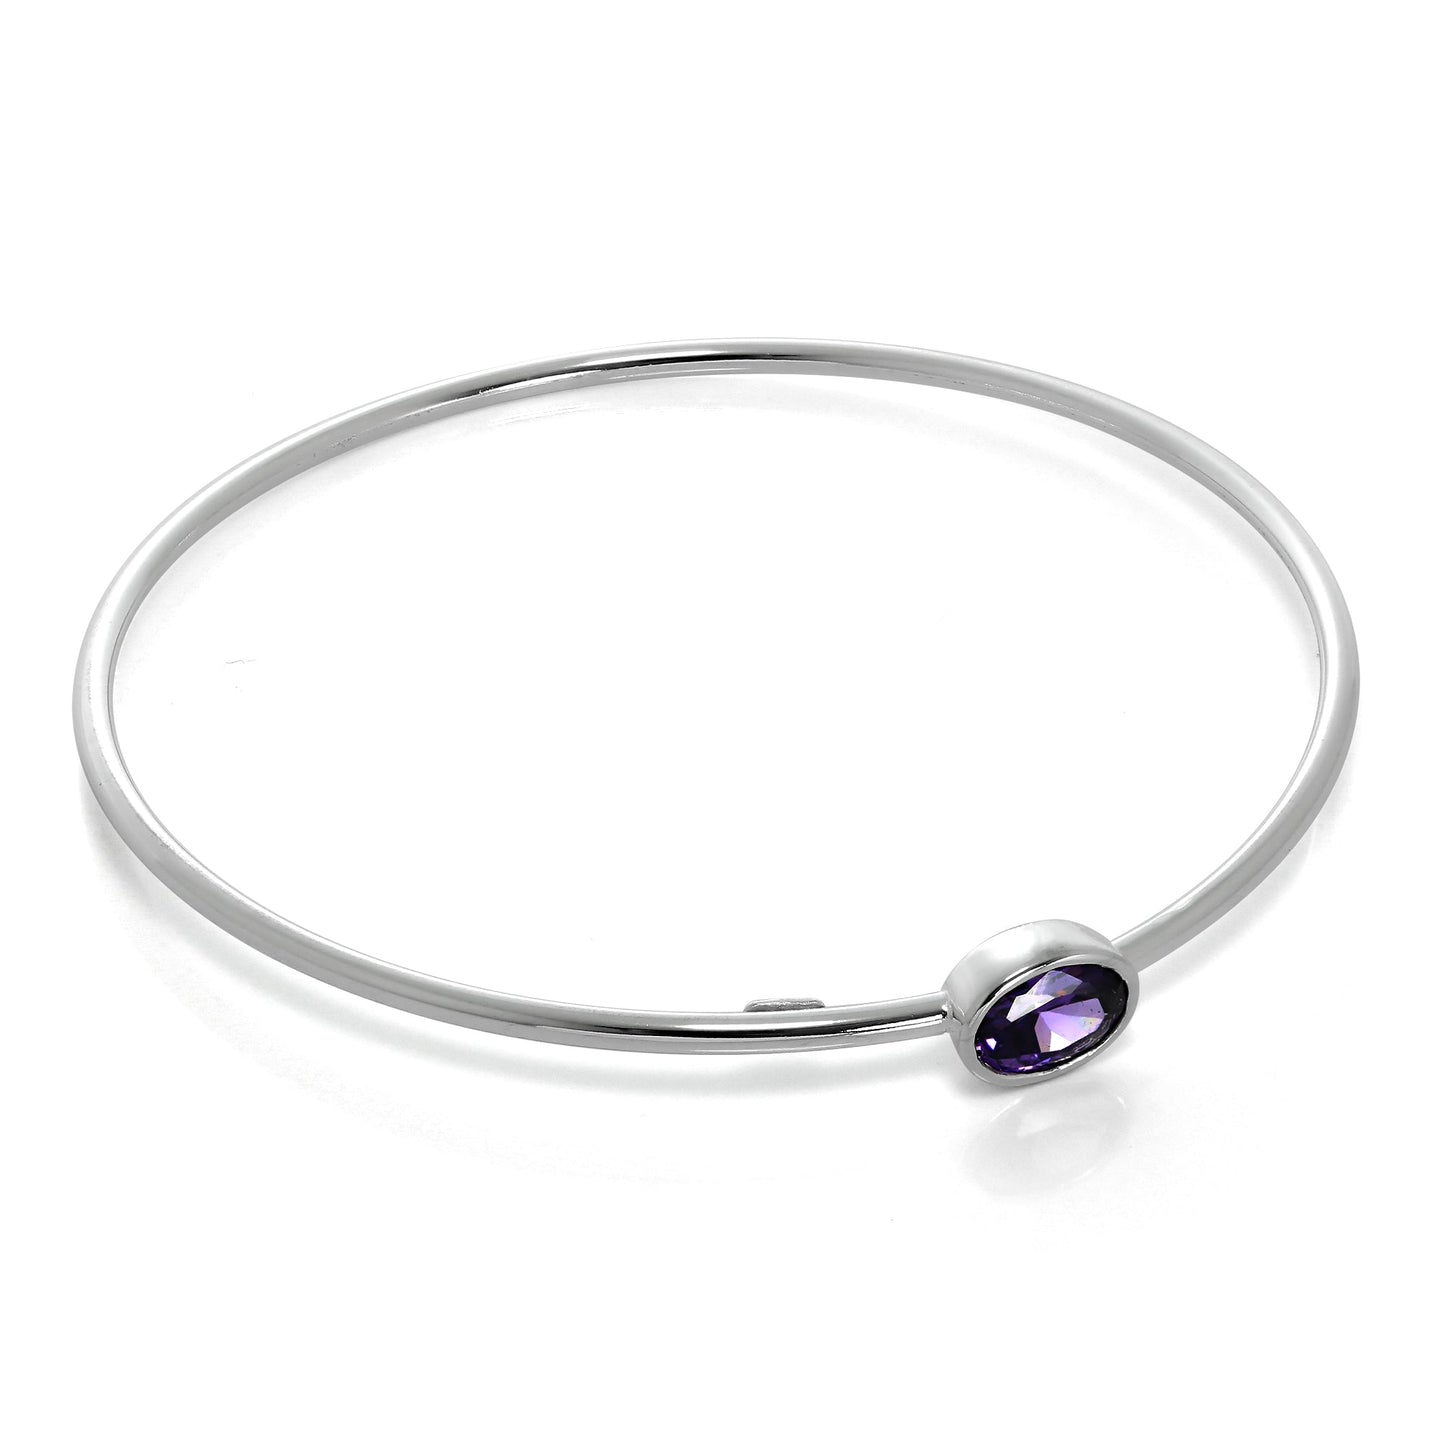 Sterling Silver Maiden Bangle with Amethyst CZ Crystal